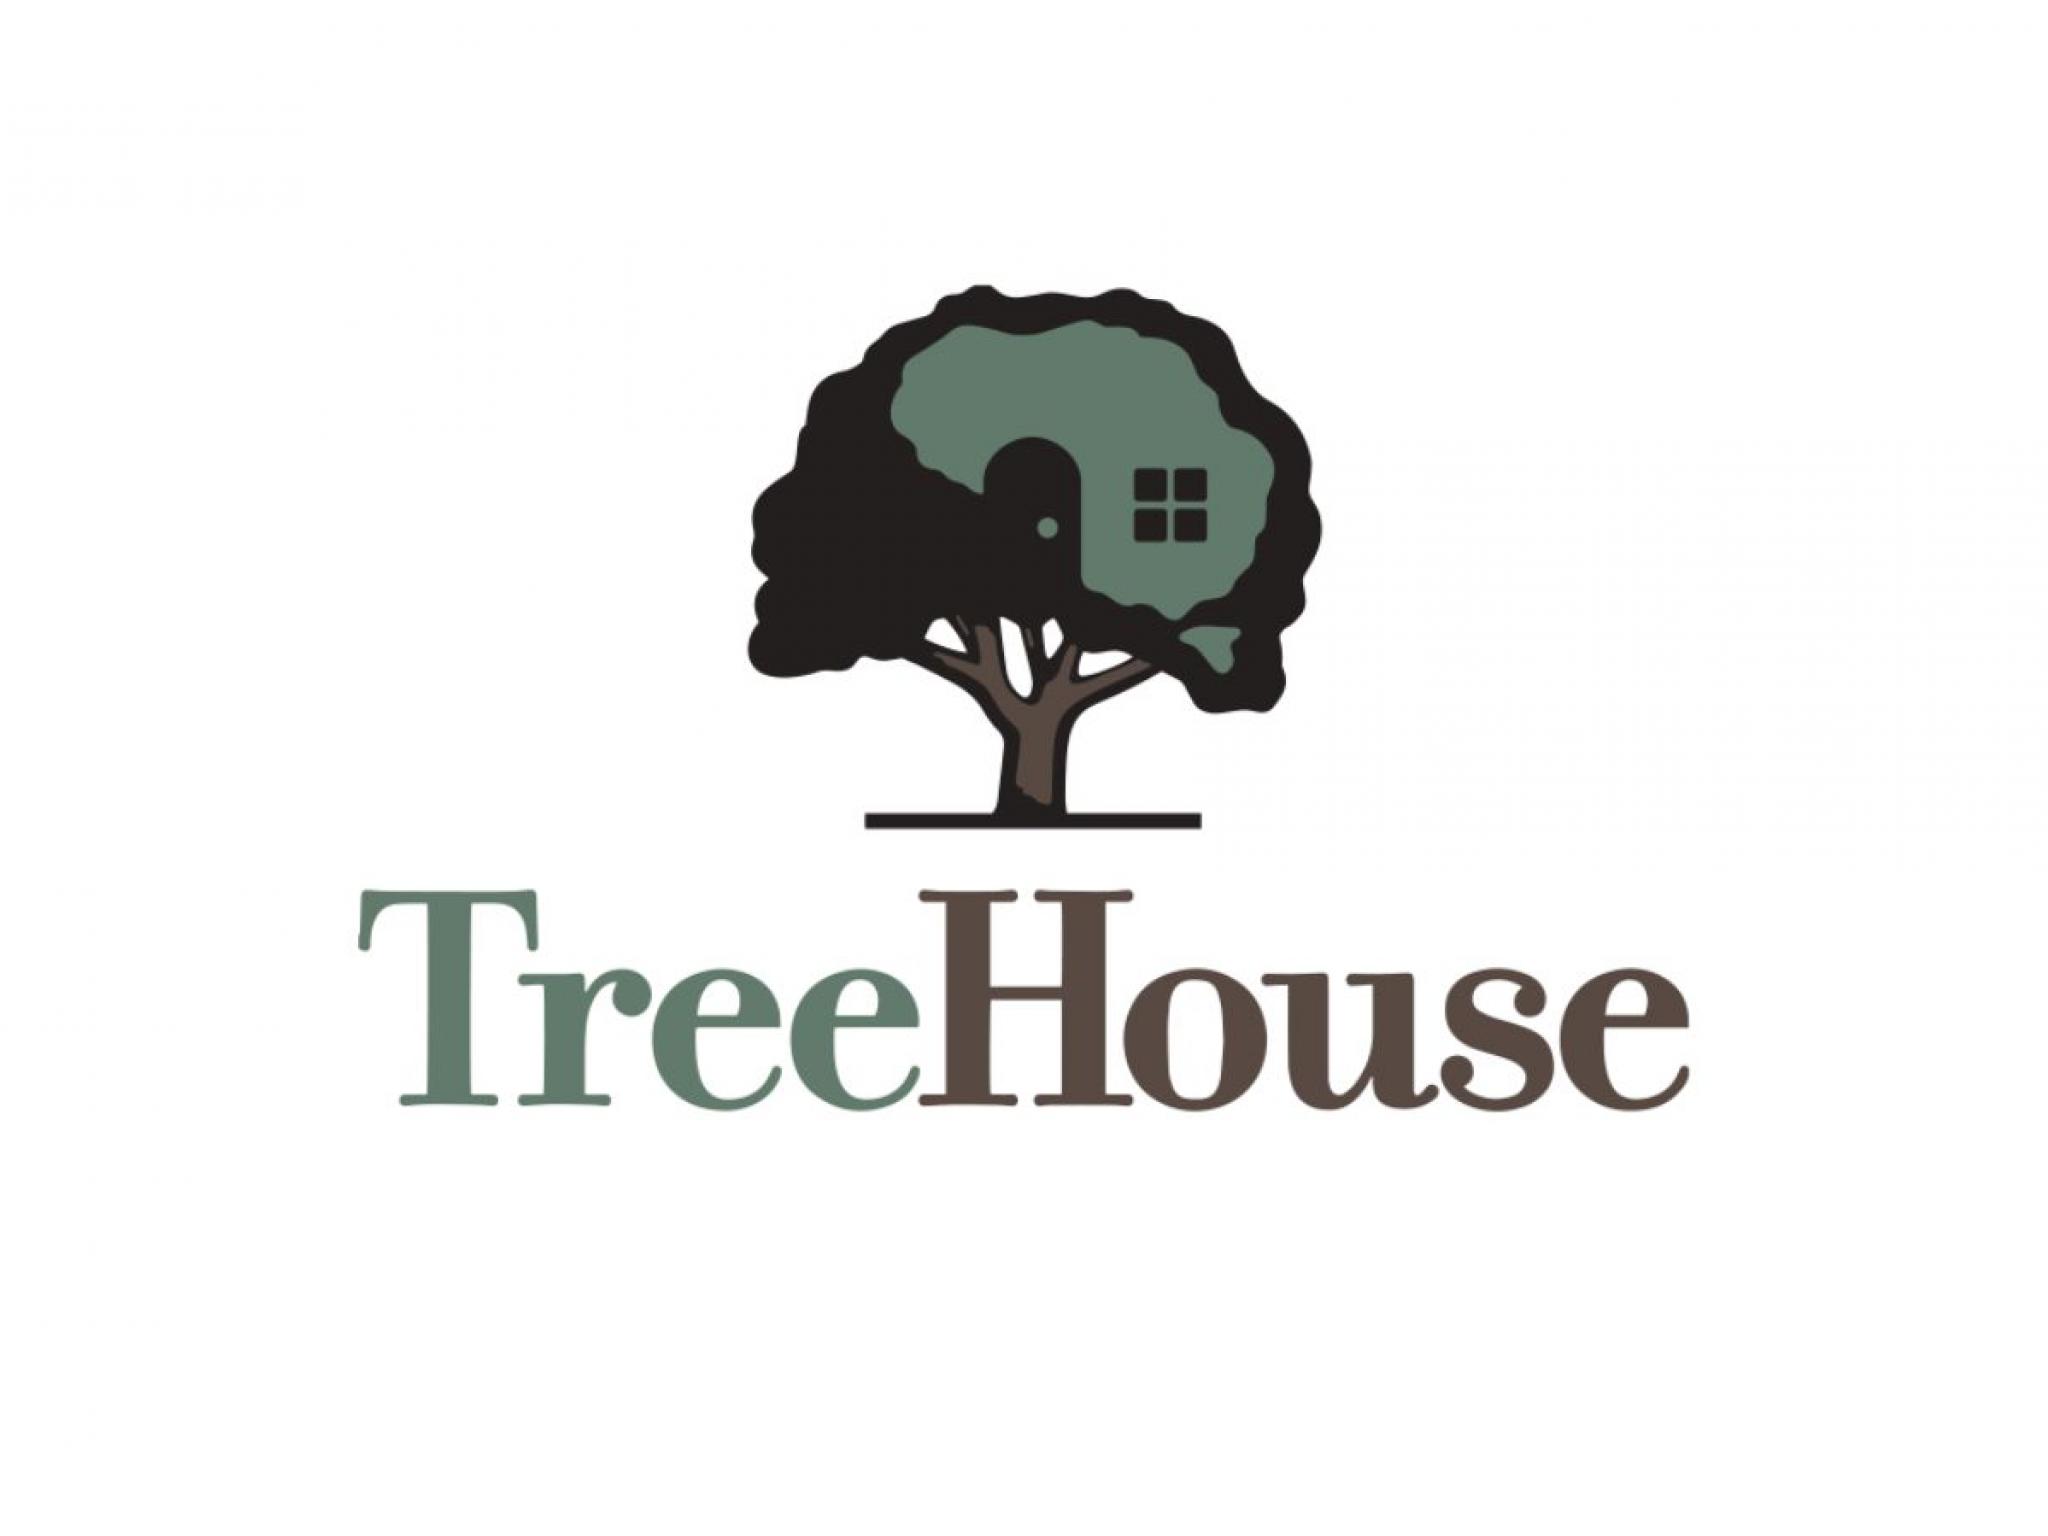  5m-bet-on-treehouse-foods-check-out-these-3-stocks-insiders-are-buying 